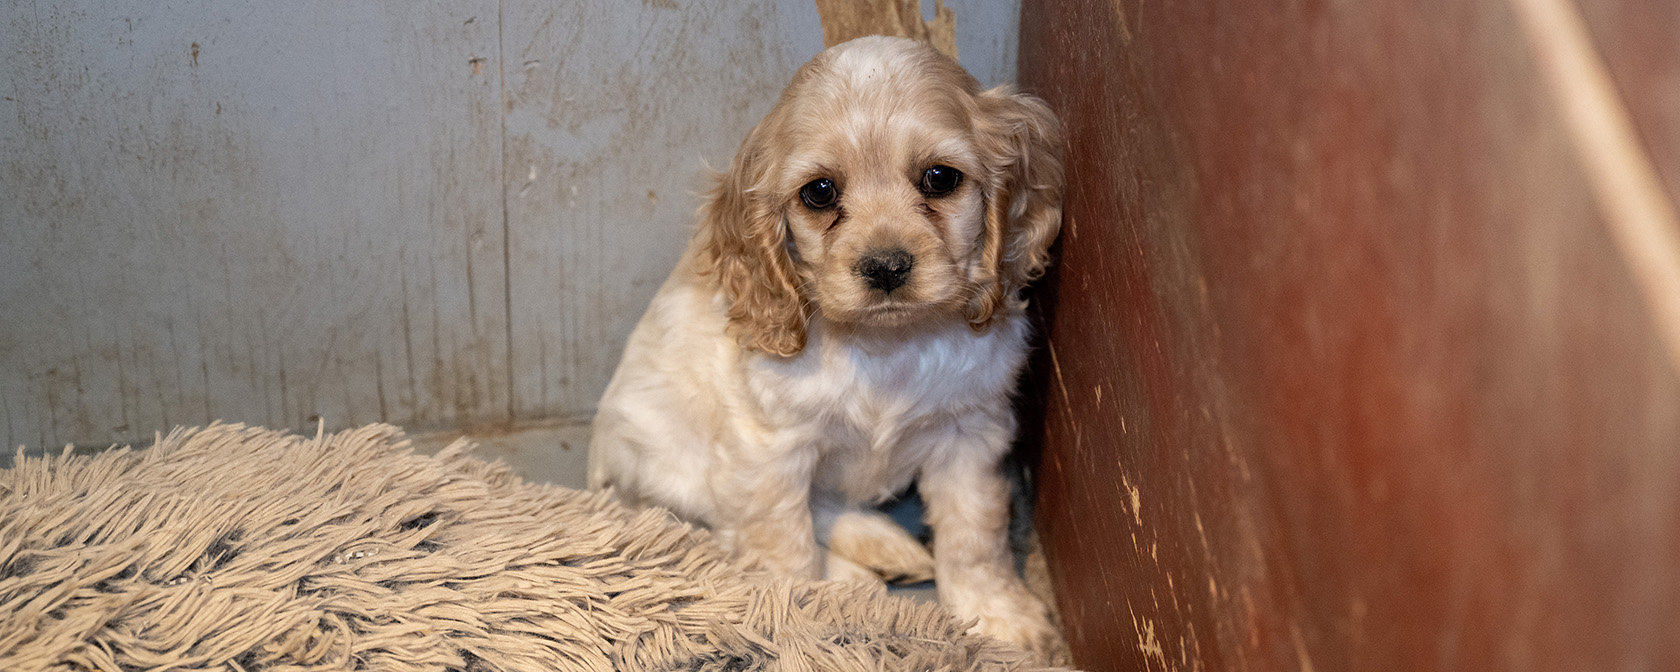 Breaking: Our rescue team saves more than 200 dogs from two Oklahoma puppy mills